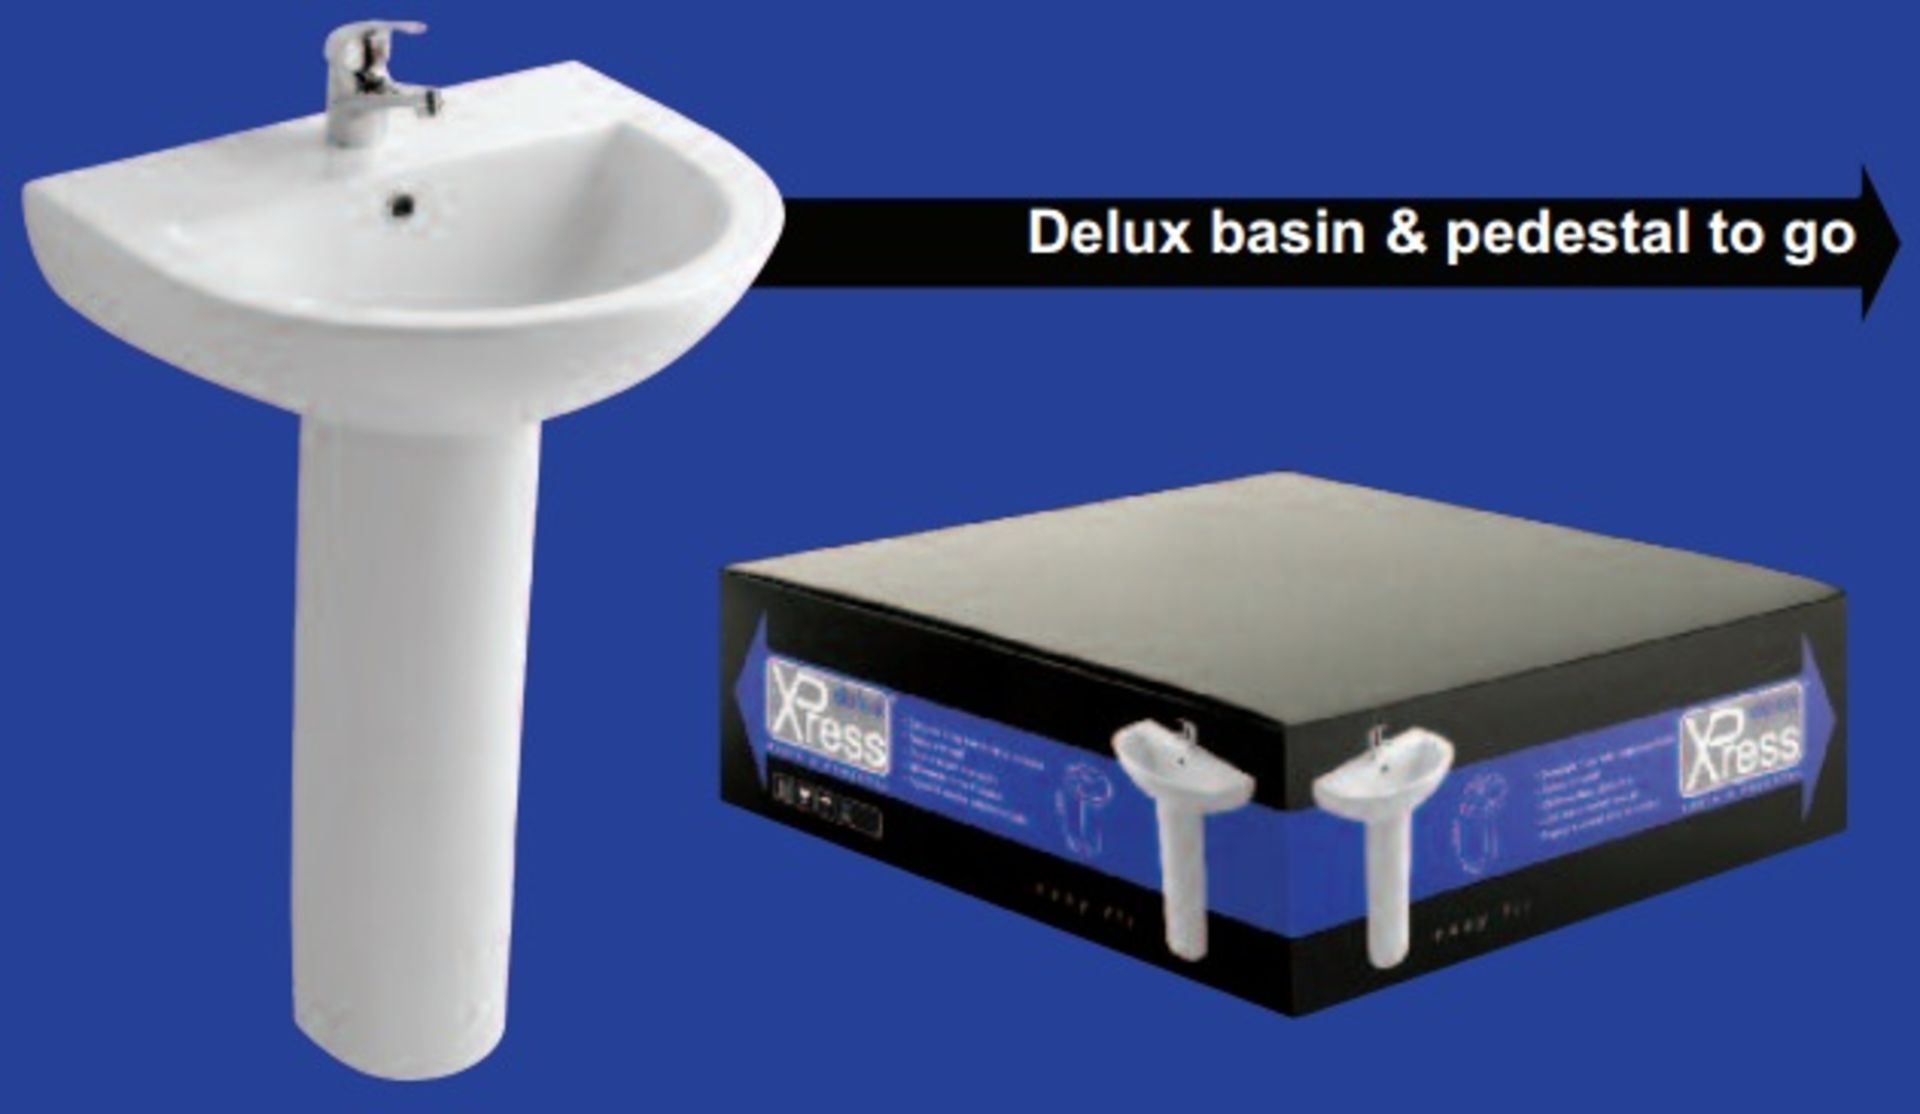 10 x Delux Xpress 1 Tap Hole 550mm Bathroom Sink Basins with Pedestals - Brand New and Boxed - Ultra